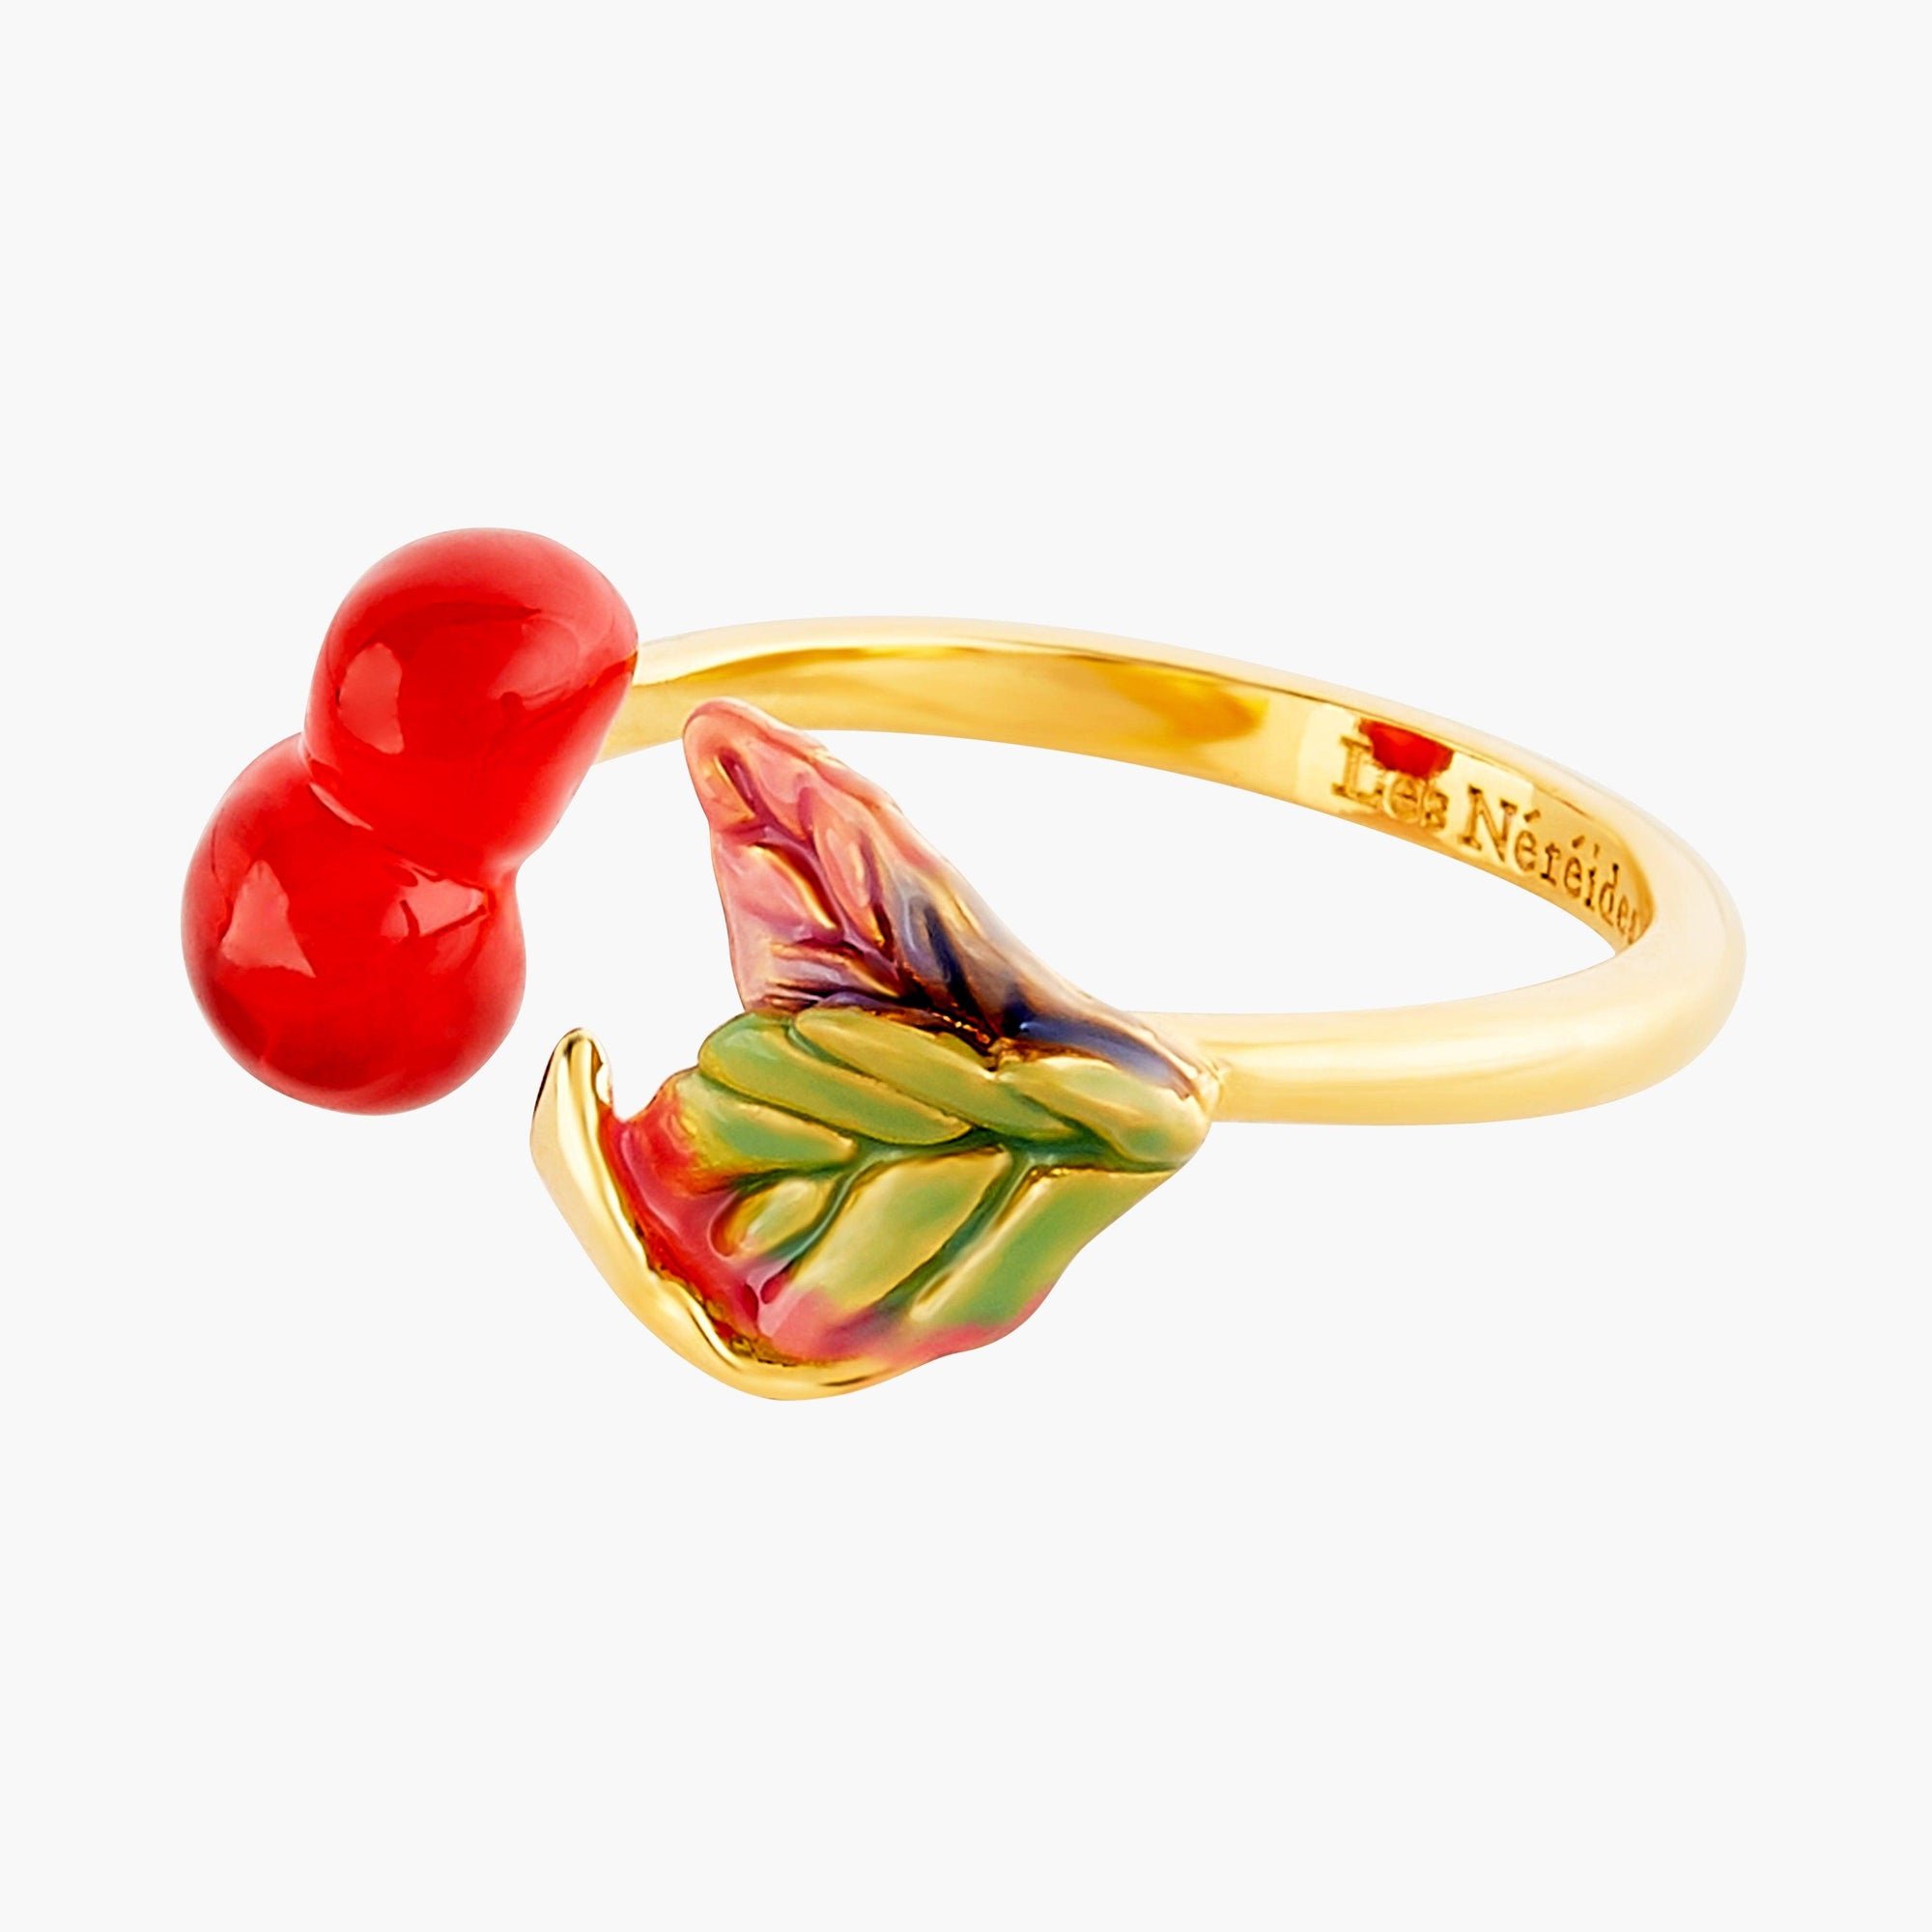 LES NÉRÉIDES CHERRIES AND LEAVES ADJUSTABLE RING - ABRY Global